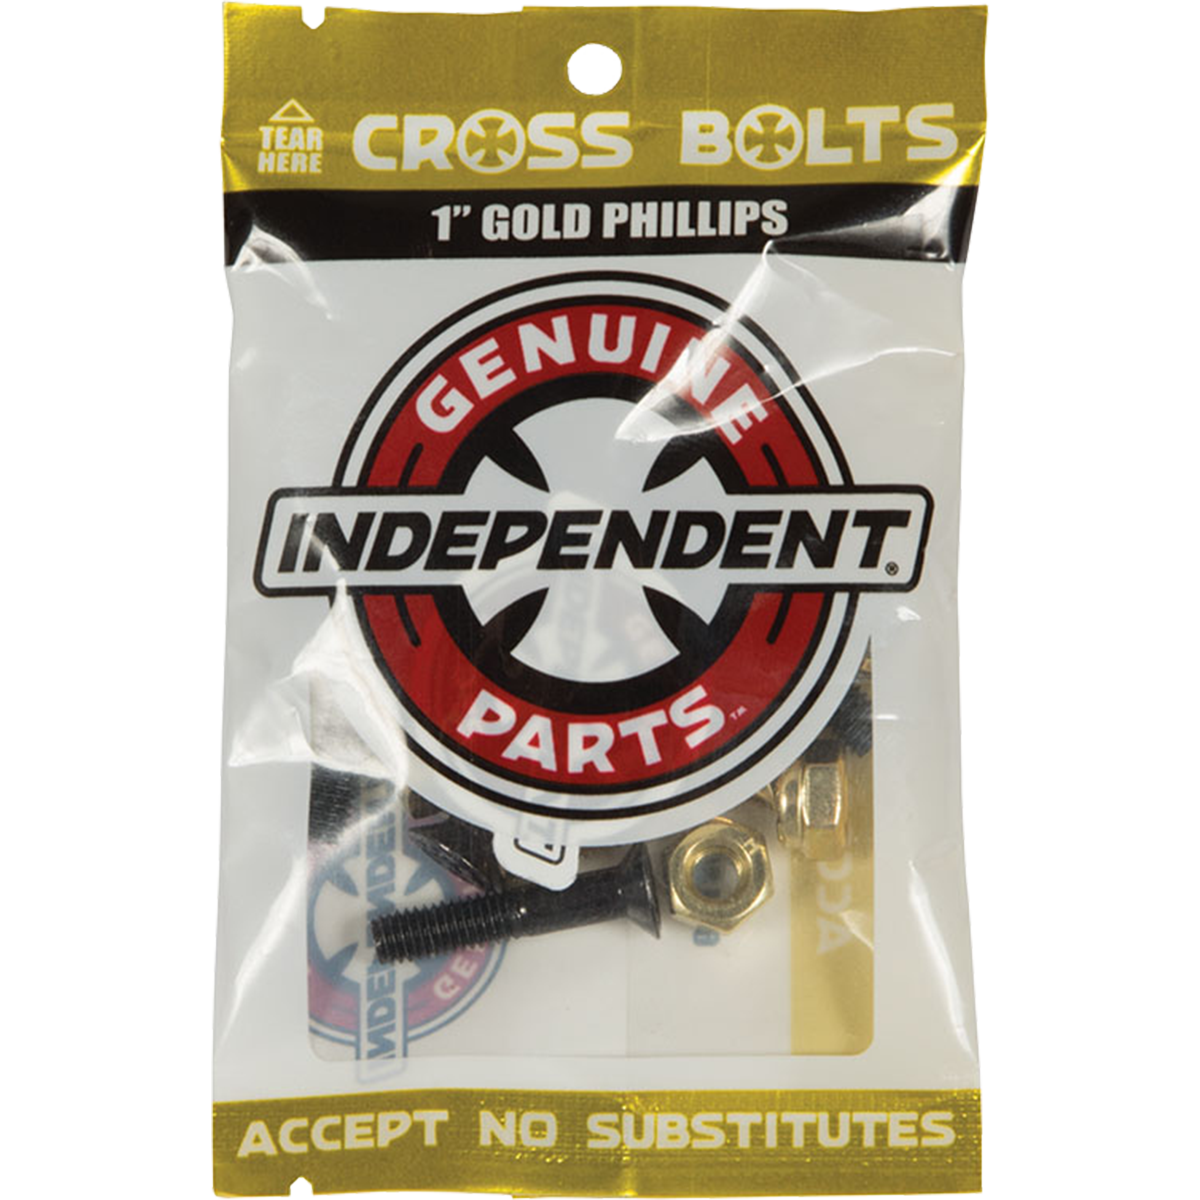 Independent Cross Bolts 1" Phillips Hardware